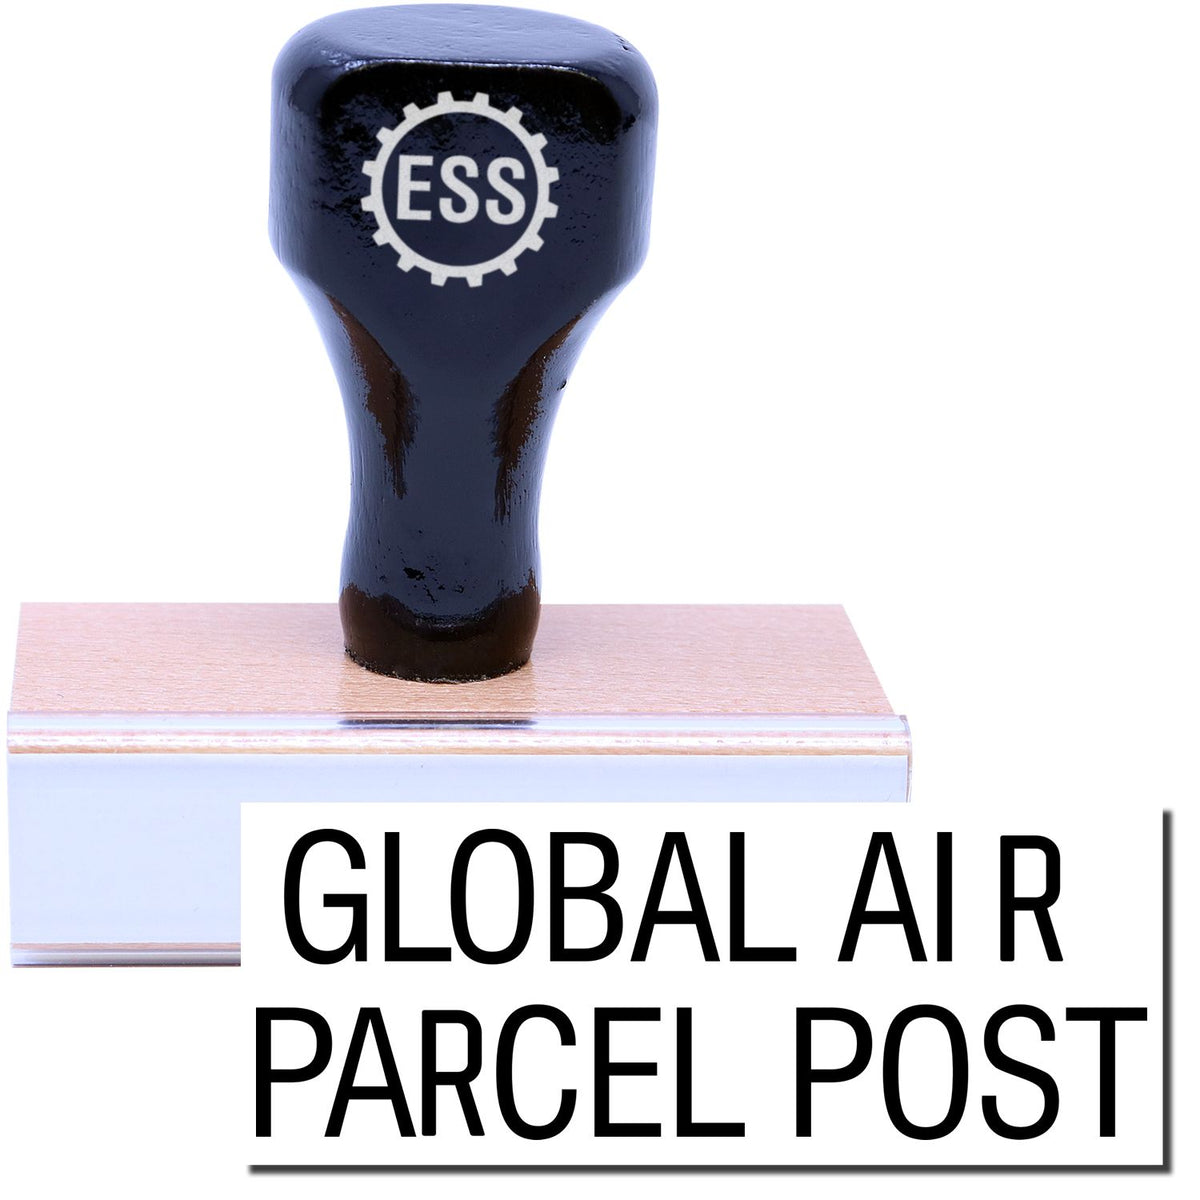 A stock office rubber stamp with a stamped image showing how the text &quot;GLOBAL AIR PARCEL POST&quot; is displayed after stamping.